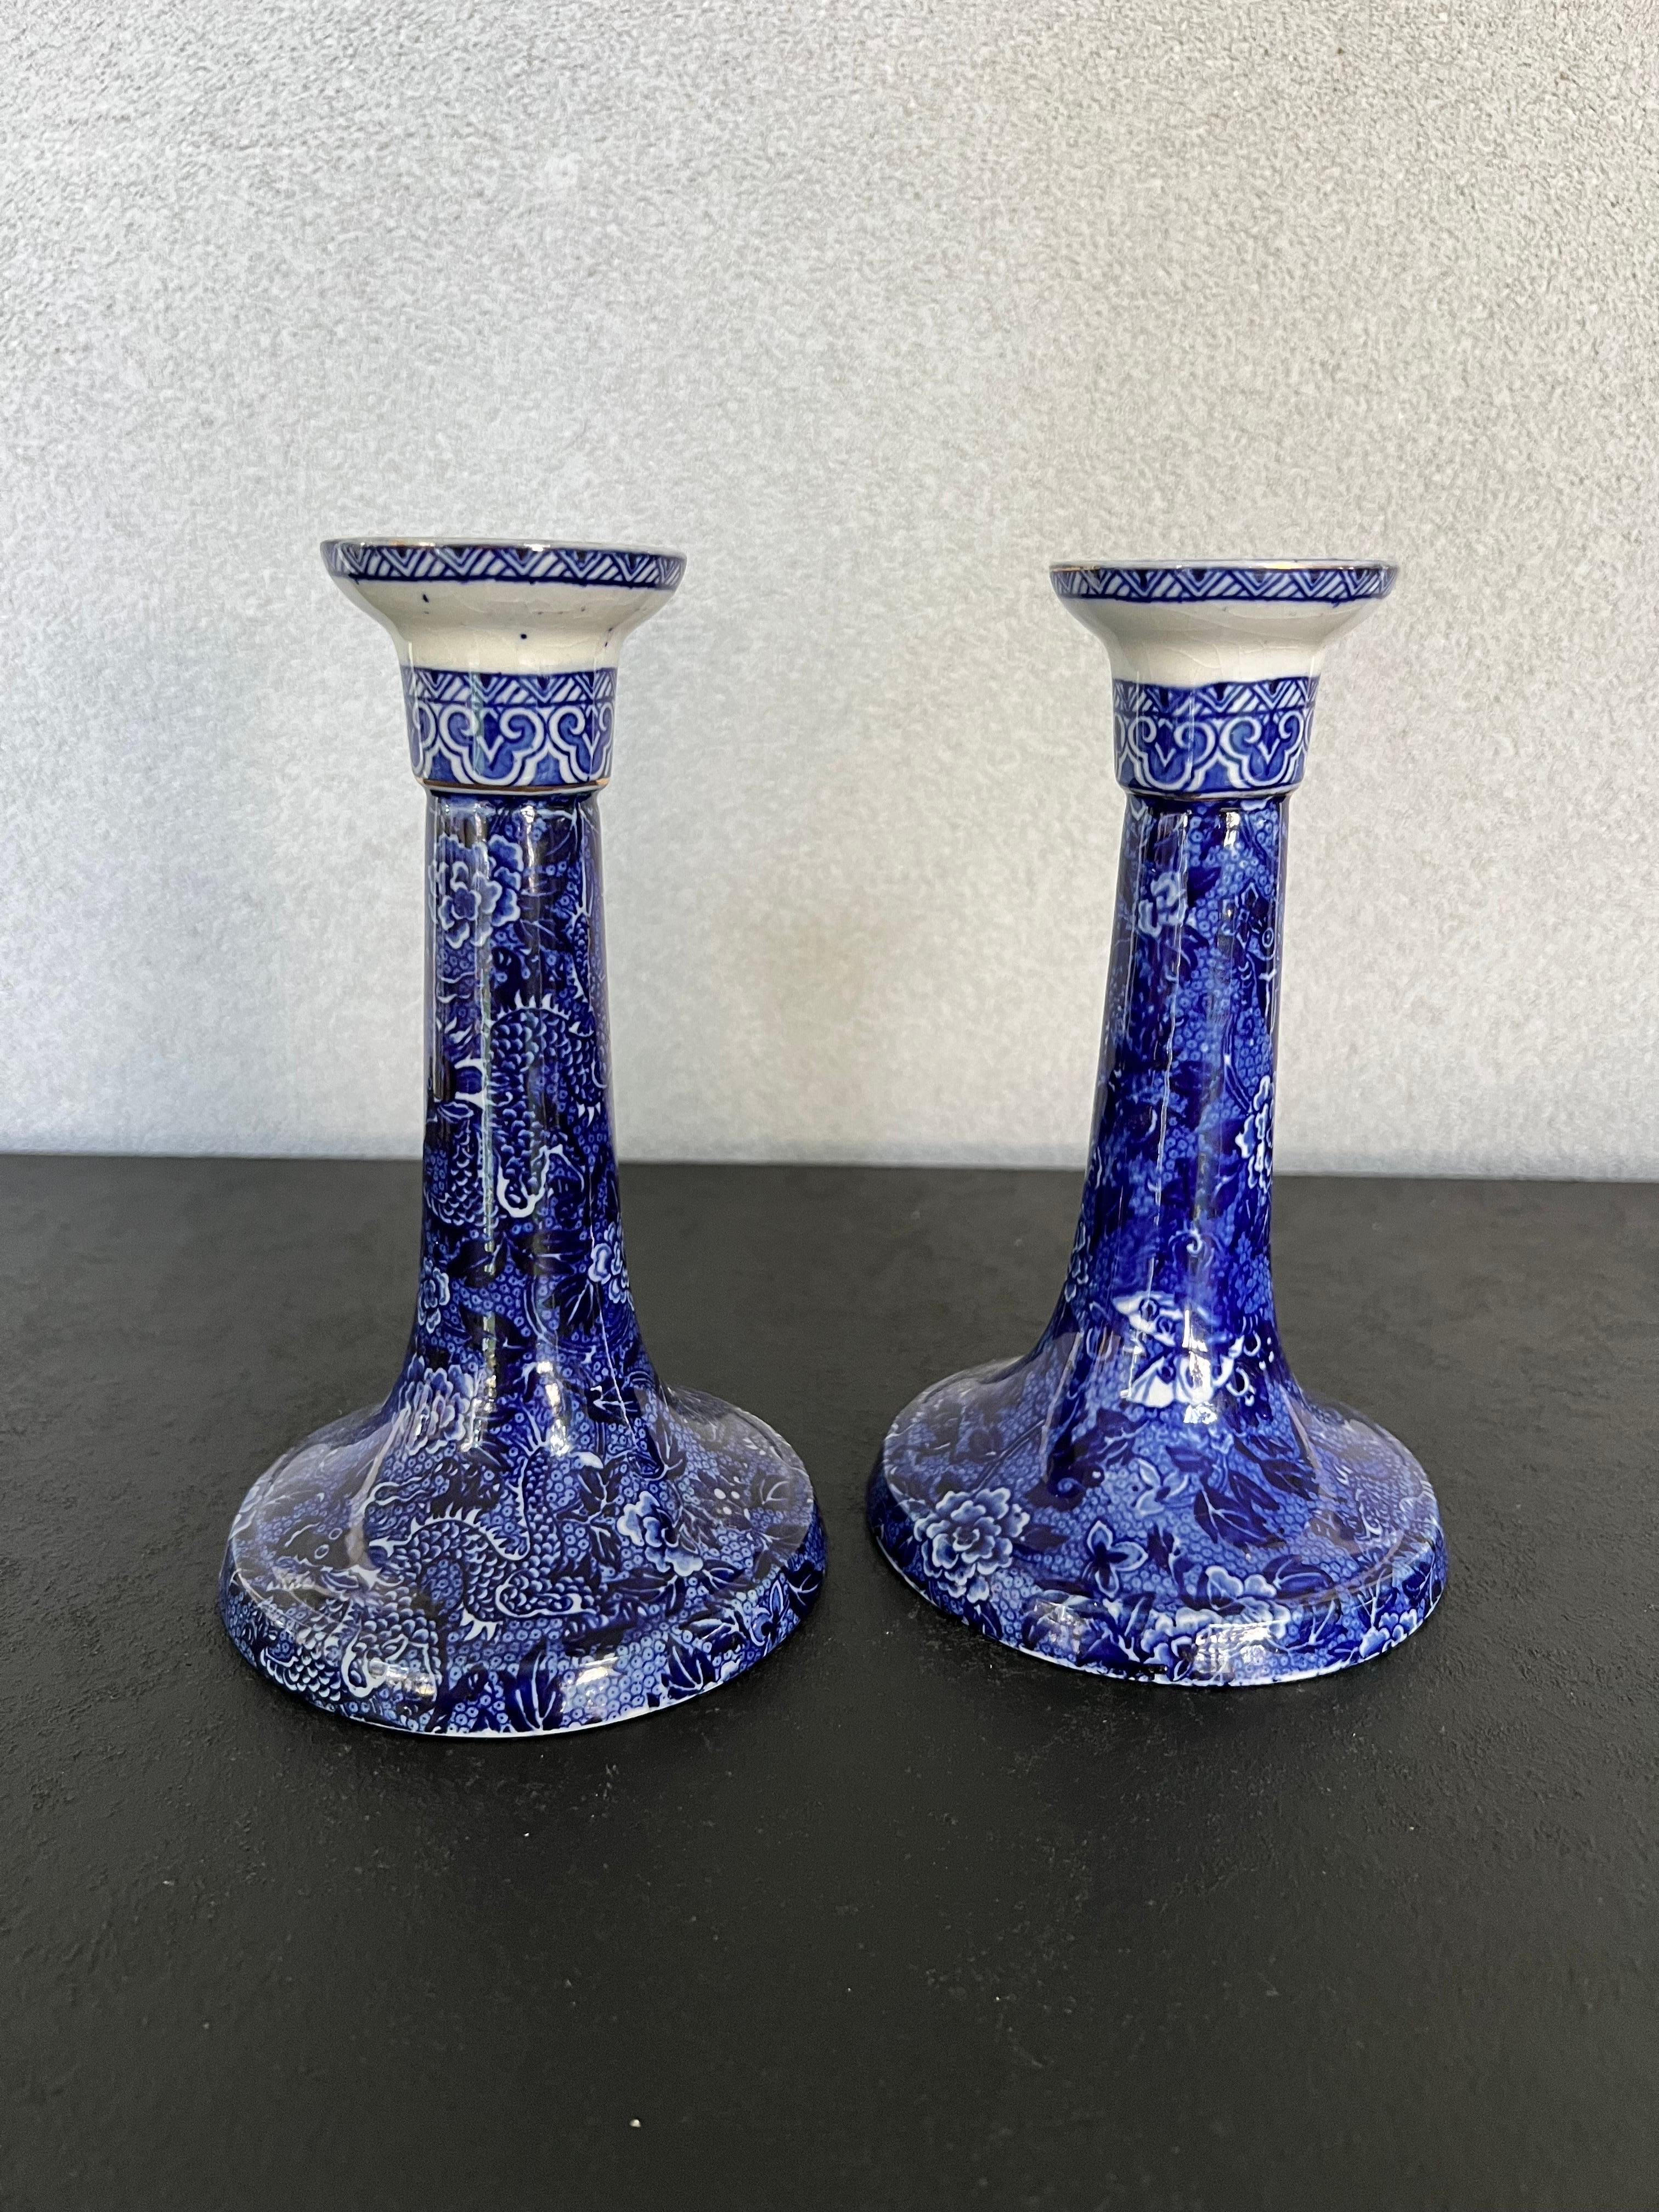 Vintage Pair Blue and White Porcelain Candlesticks made by Shelly/England  For Sale 4